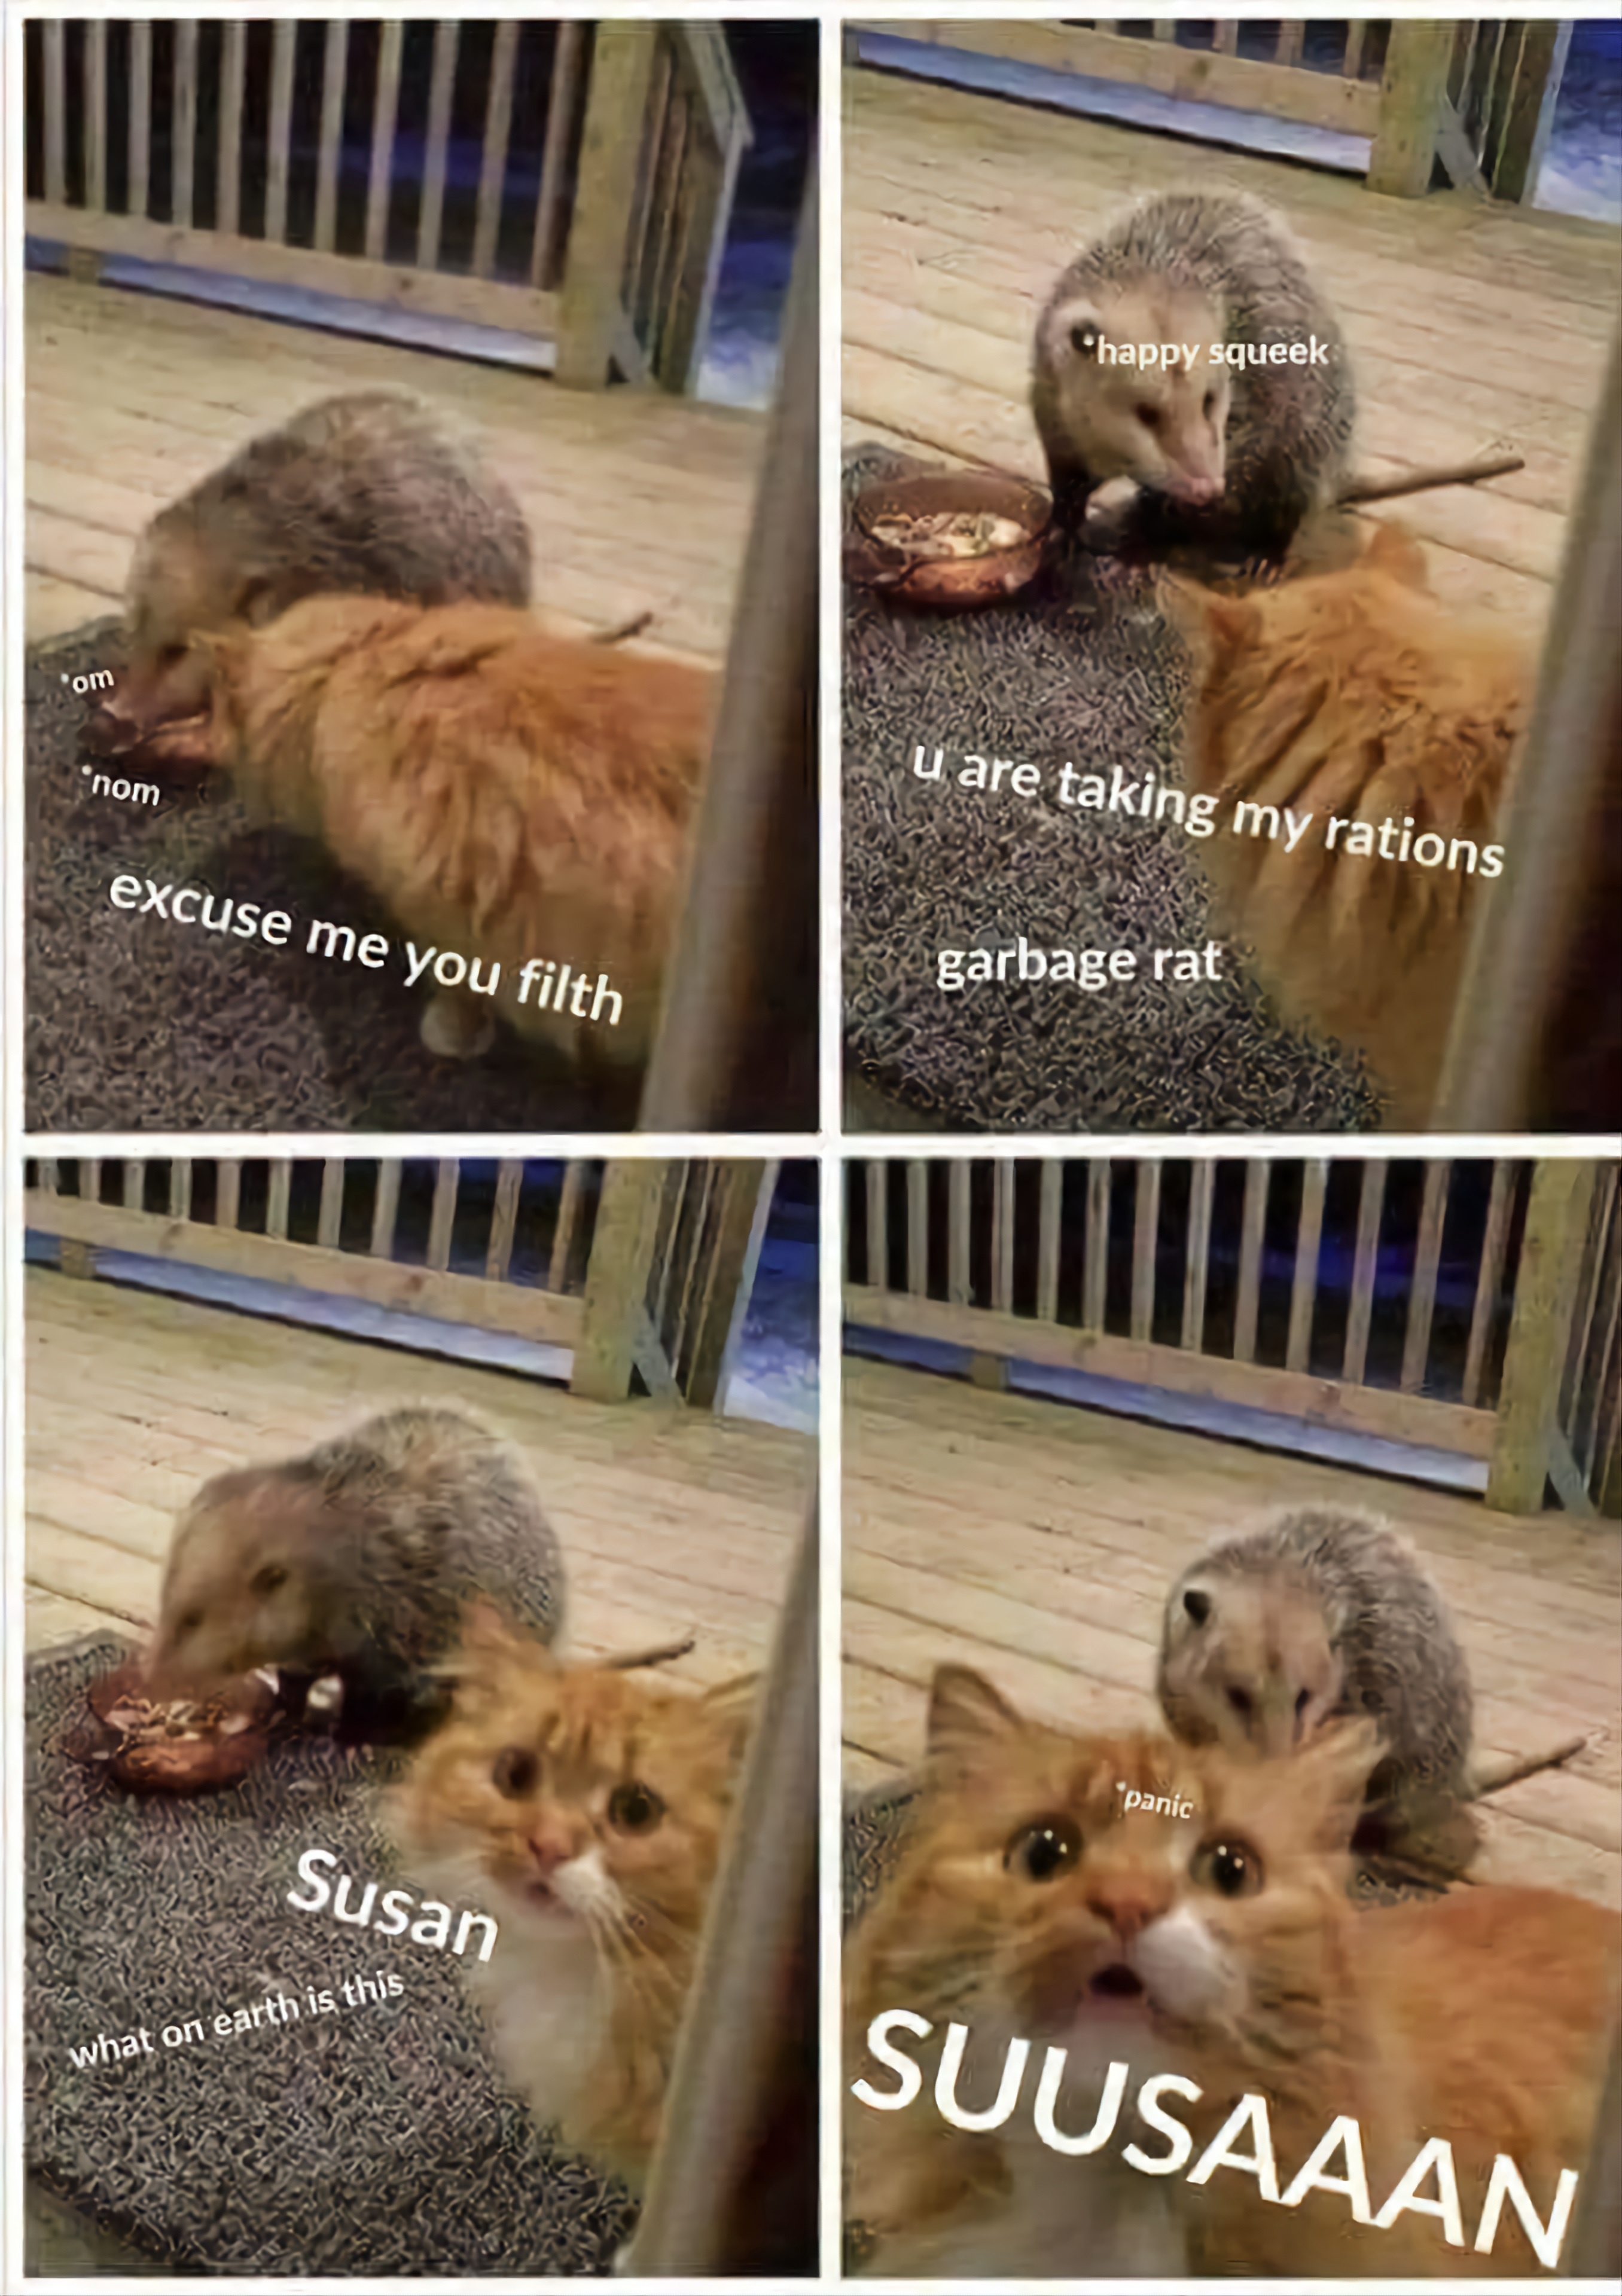 funny memes - susan rations meme - "happy squeek u are taking my rations nom garbage rat excuse me you filth Susan Suusaaan what on earth is this